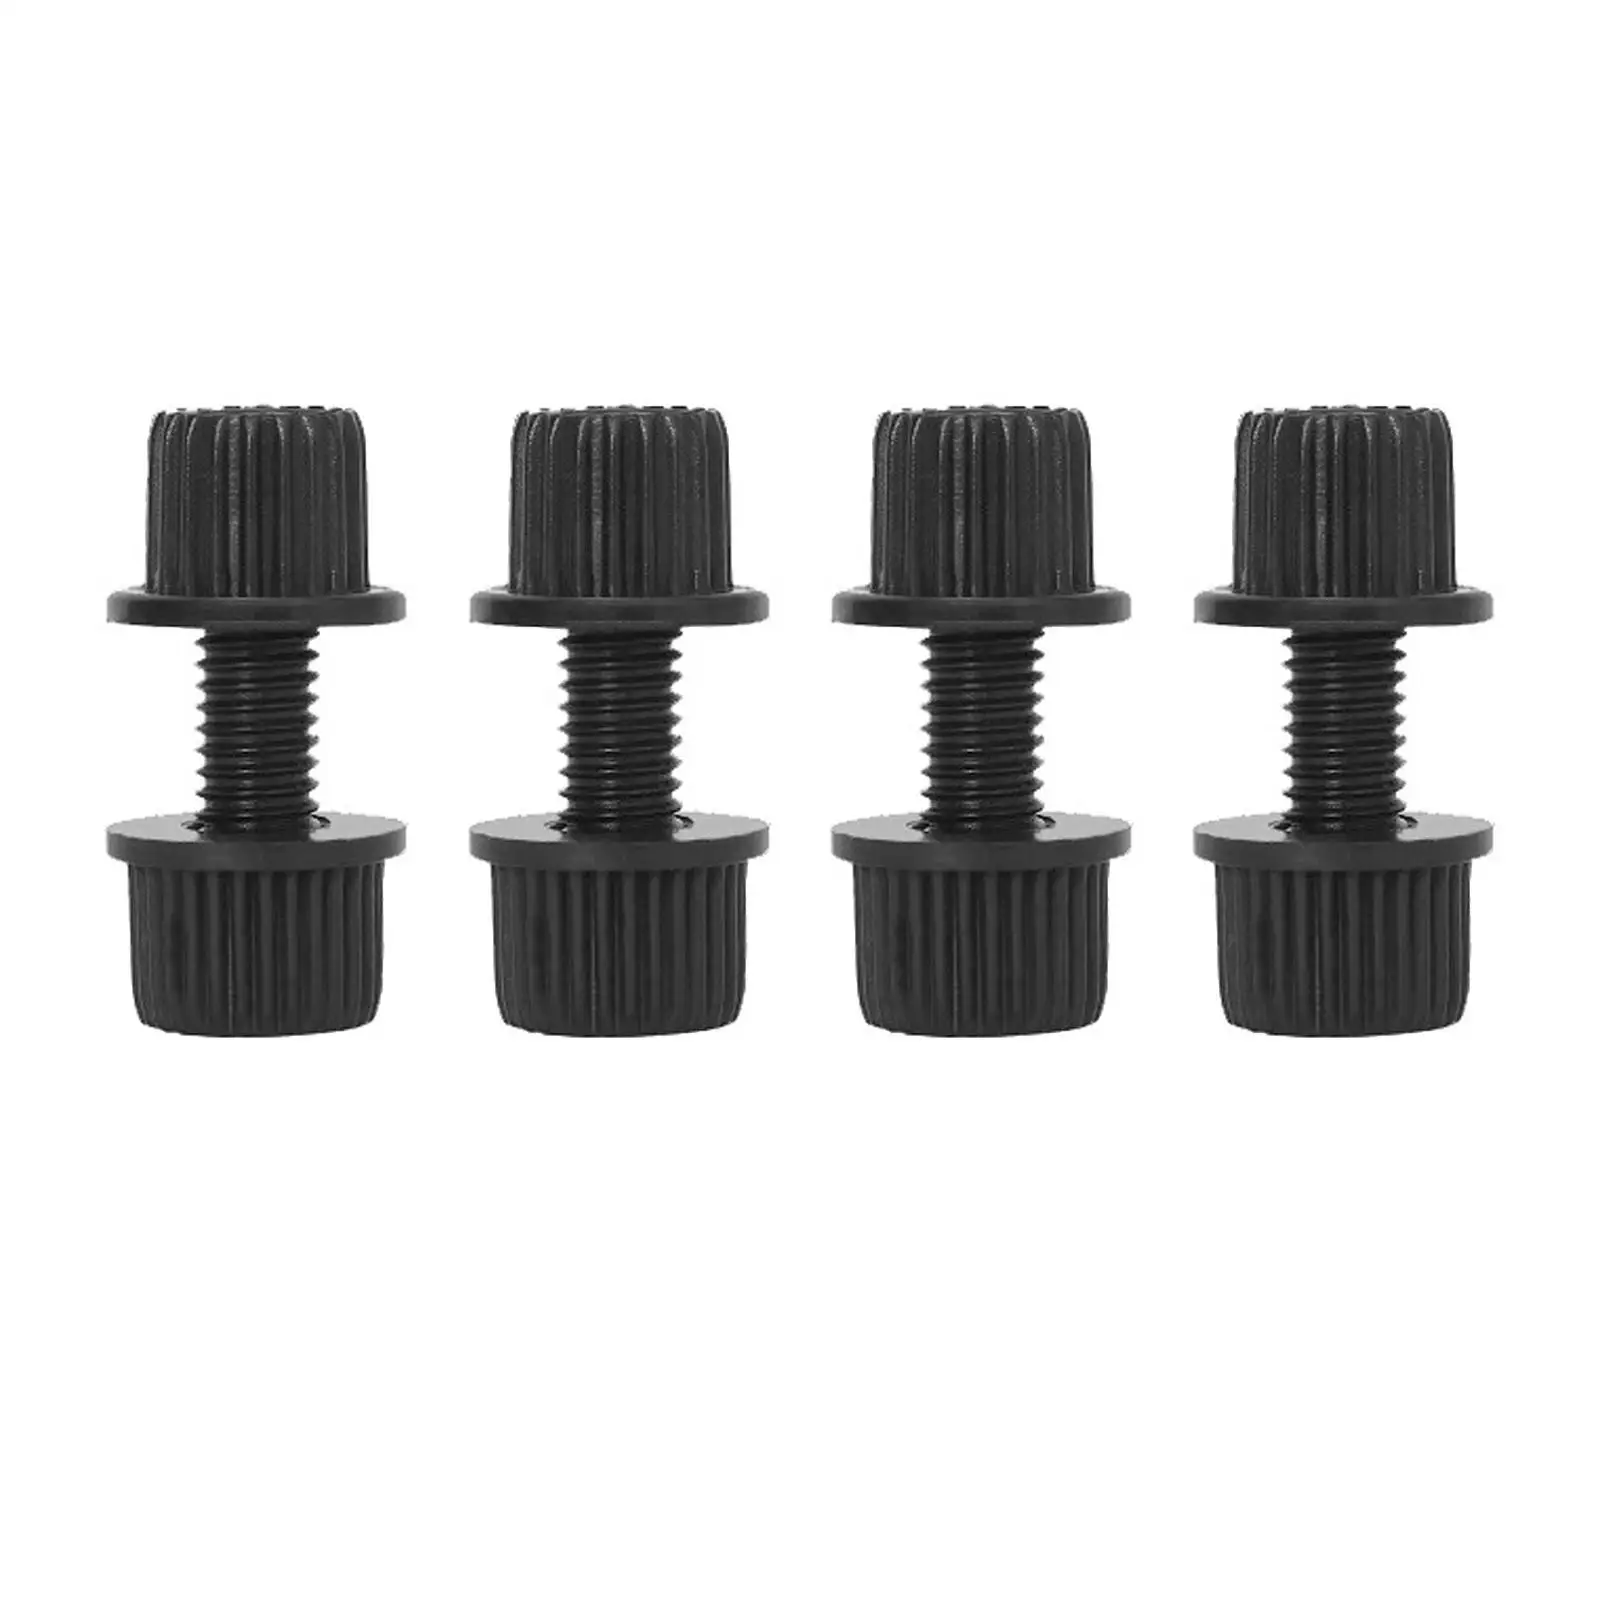 4 x Motorcycle License Plate Frame Screws Kit Anti Rust Rust Proof Fastenings Screws for Yacht License Plate Easy Installation